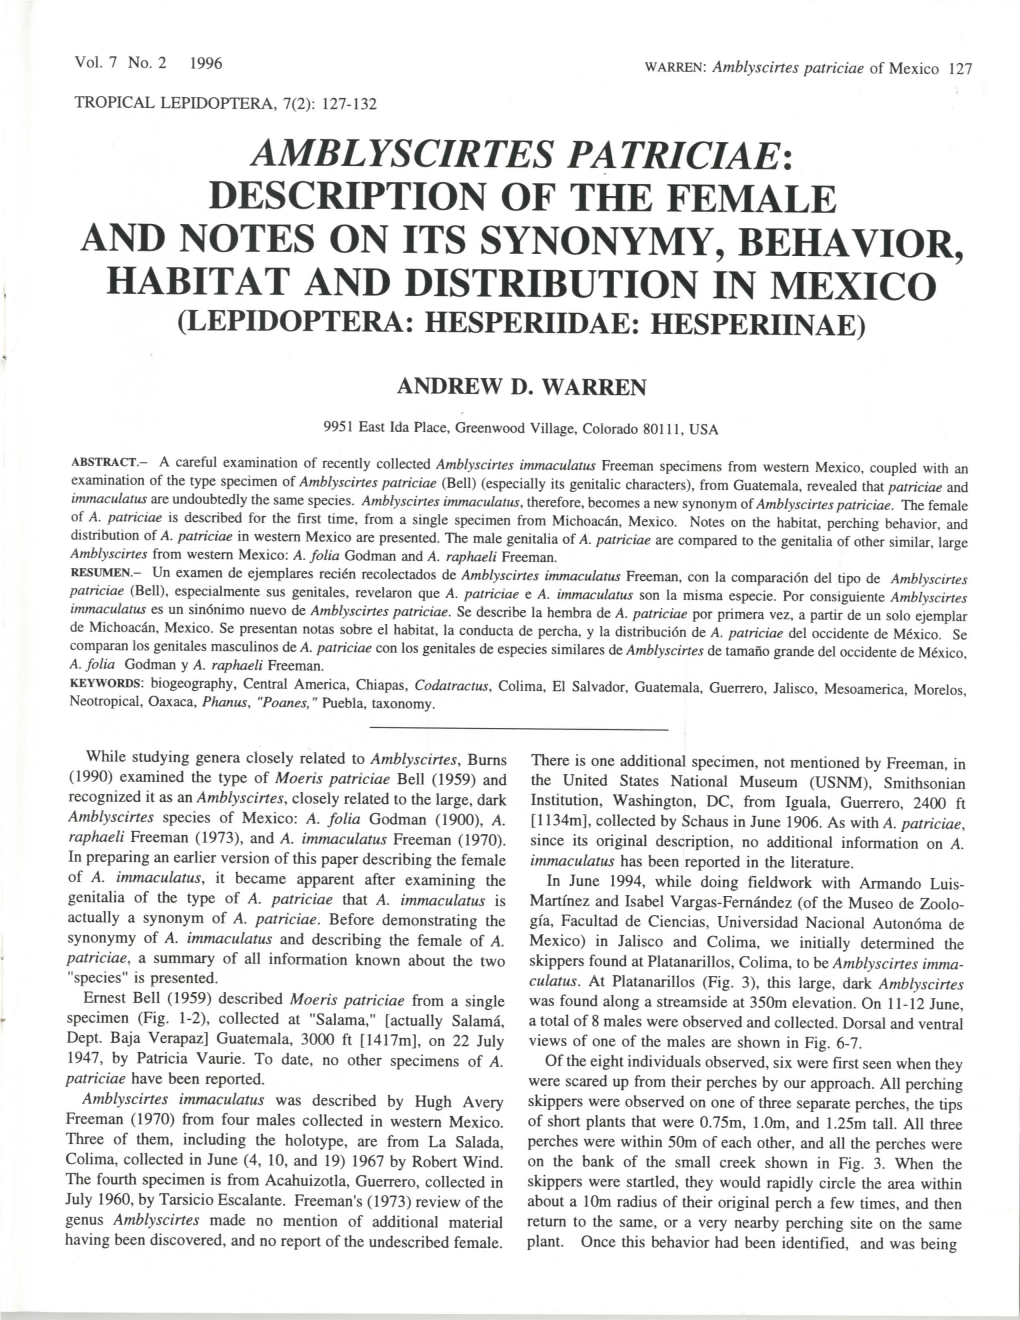 Amblyscirtes Patricias: Description of the Female and Notes on Its Synonymy, Behavior, Habitat and Distribution in Mexico (Lepidoptera: Hesperiidae: Hesperiinae)